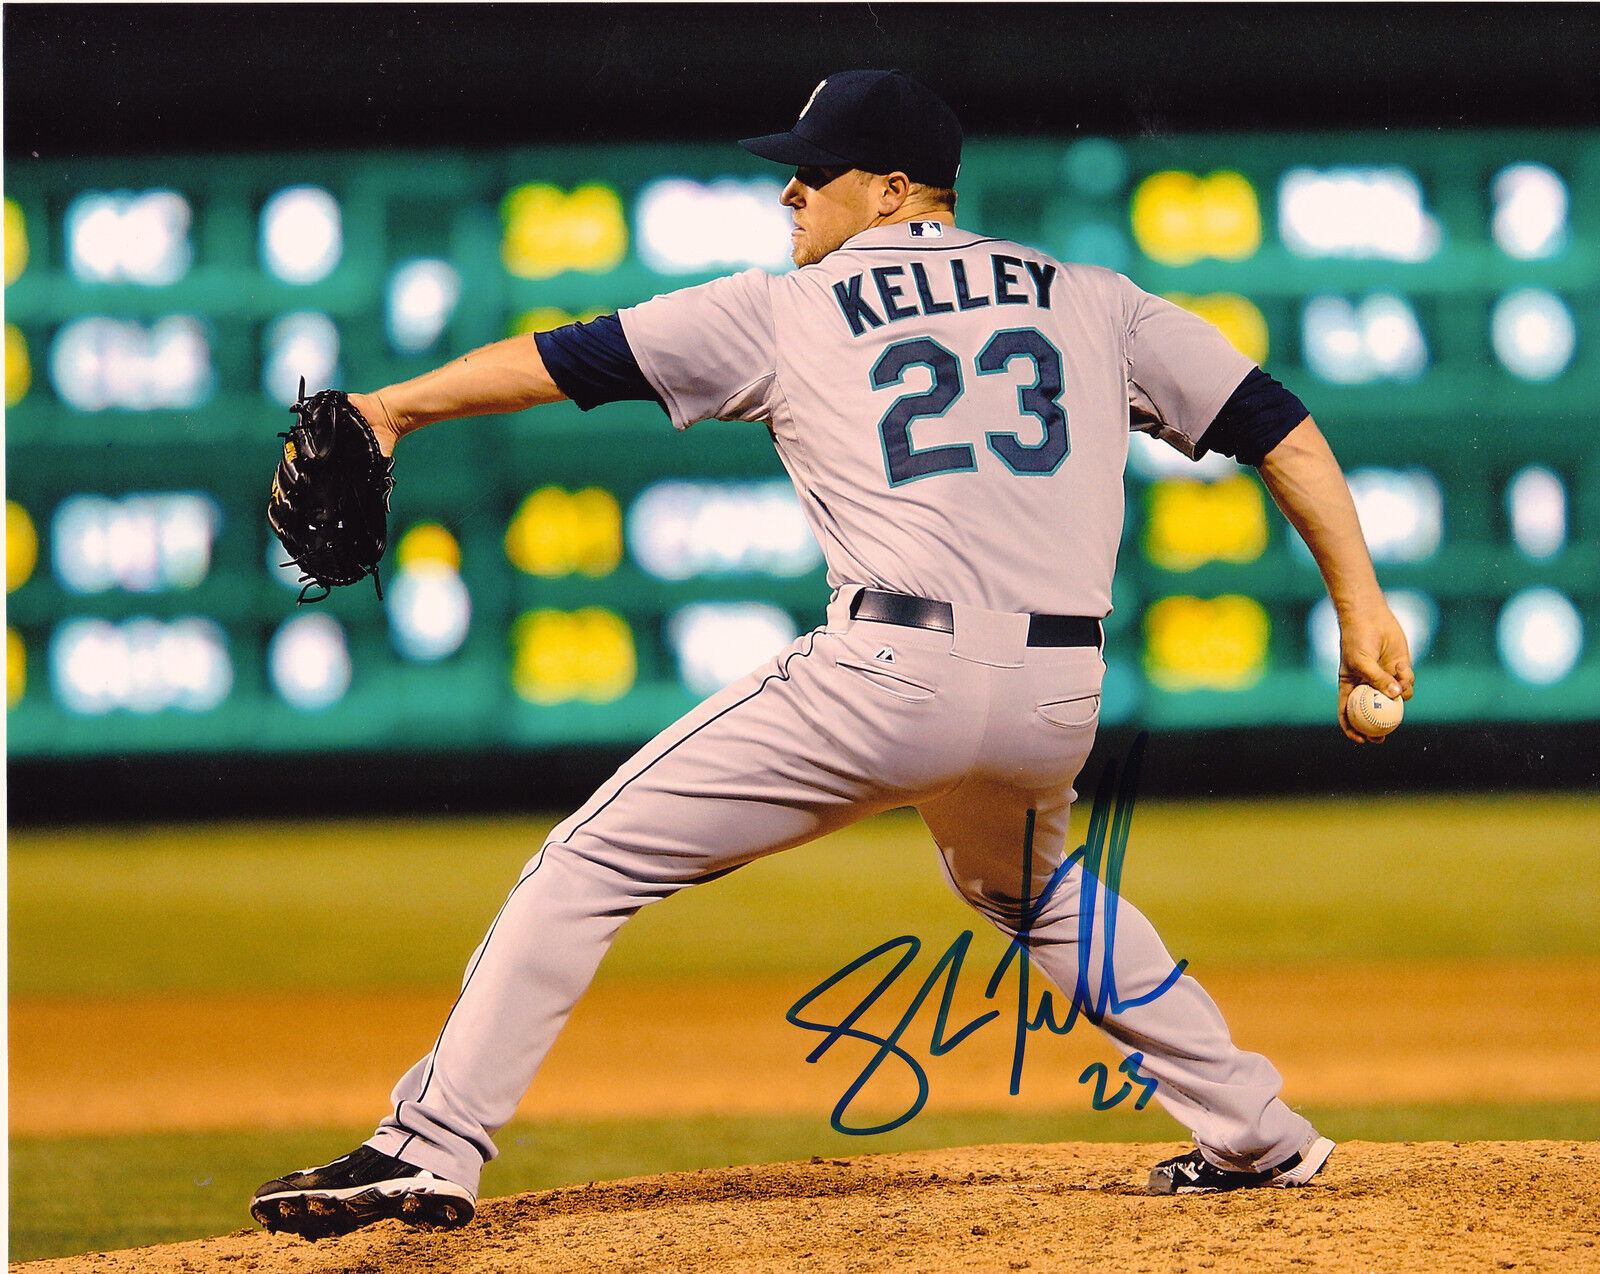 SHAWN KELLEY SEATTLE MARINERS ACTION SIGNED 8x10